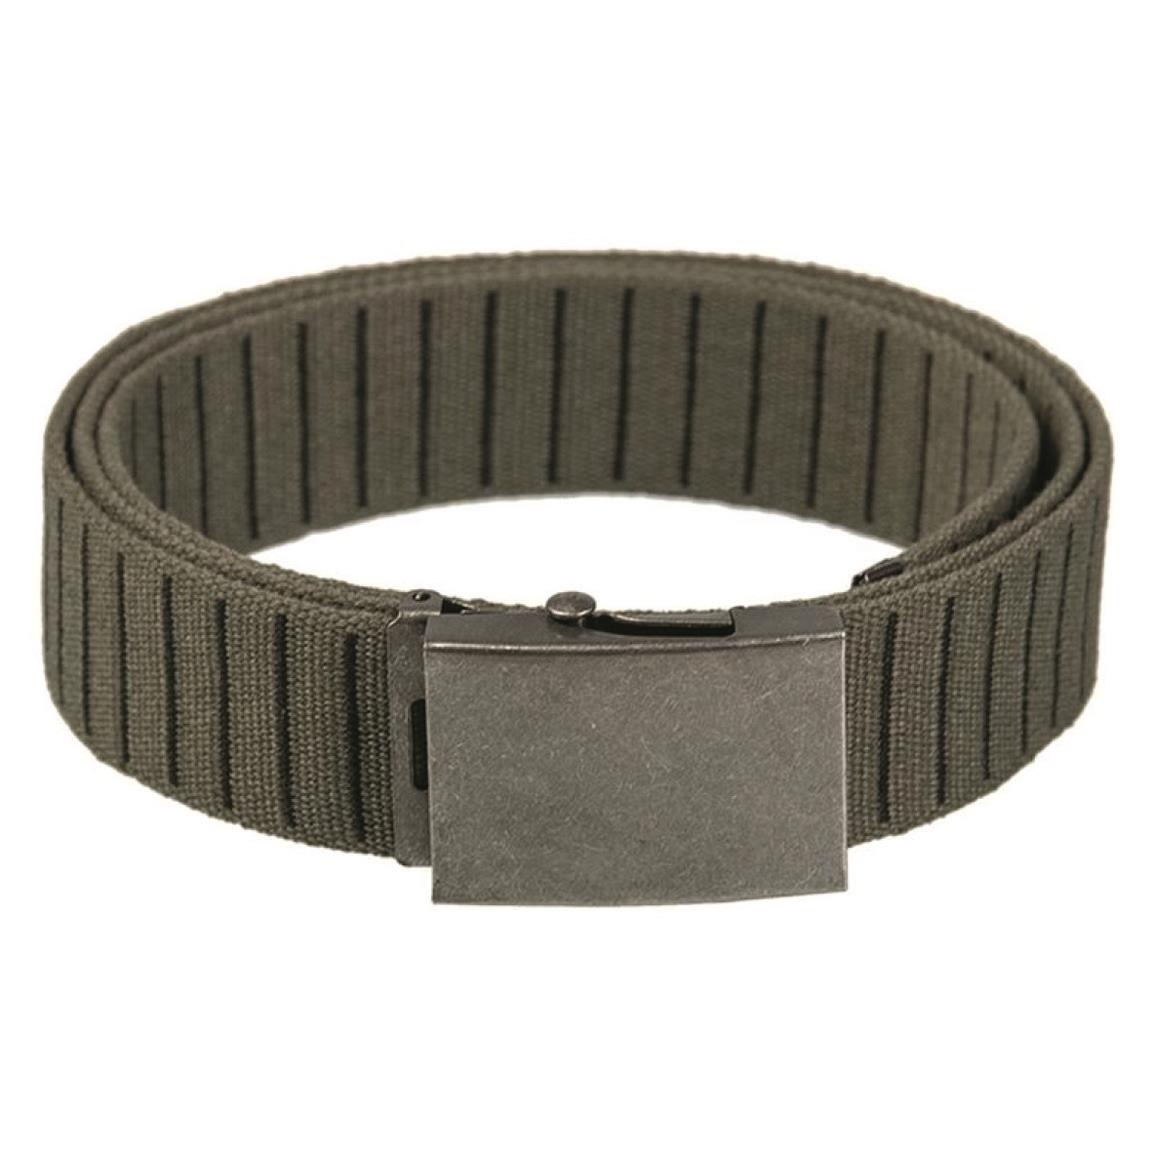 Mil-Tec 40mm Military Style Iron Buckle Roller Belts, 2 pack, Olive Drab